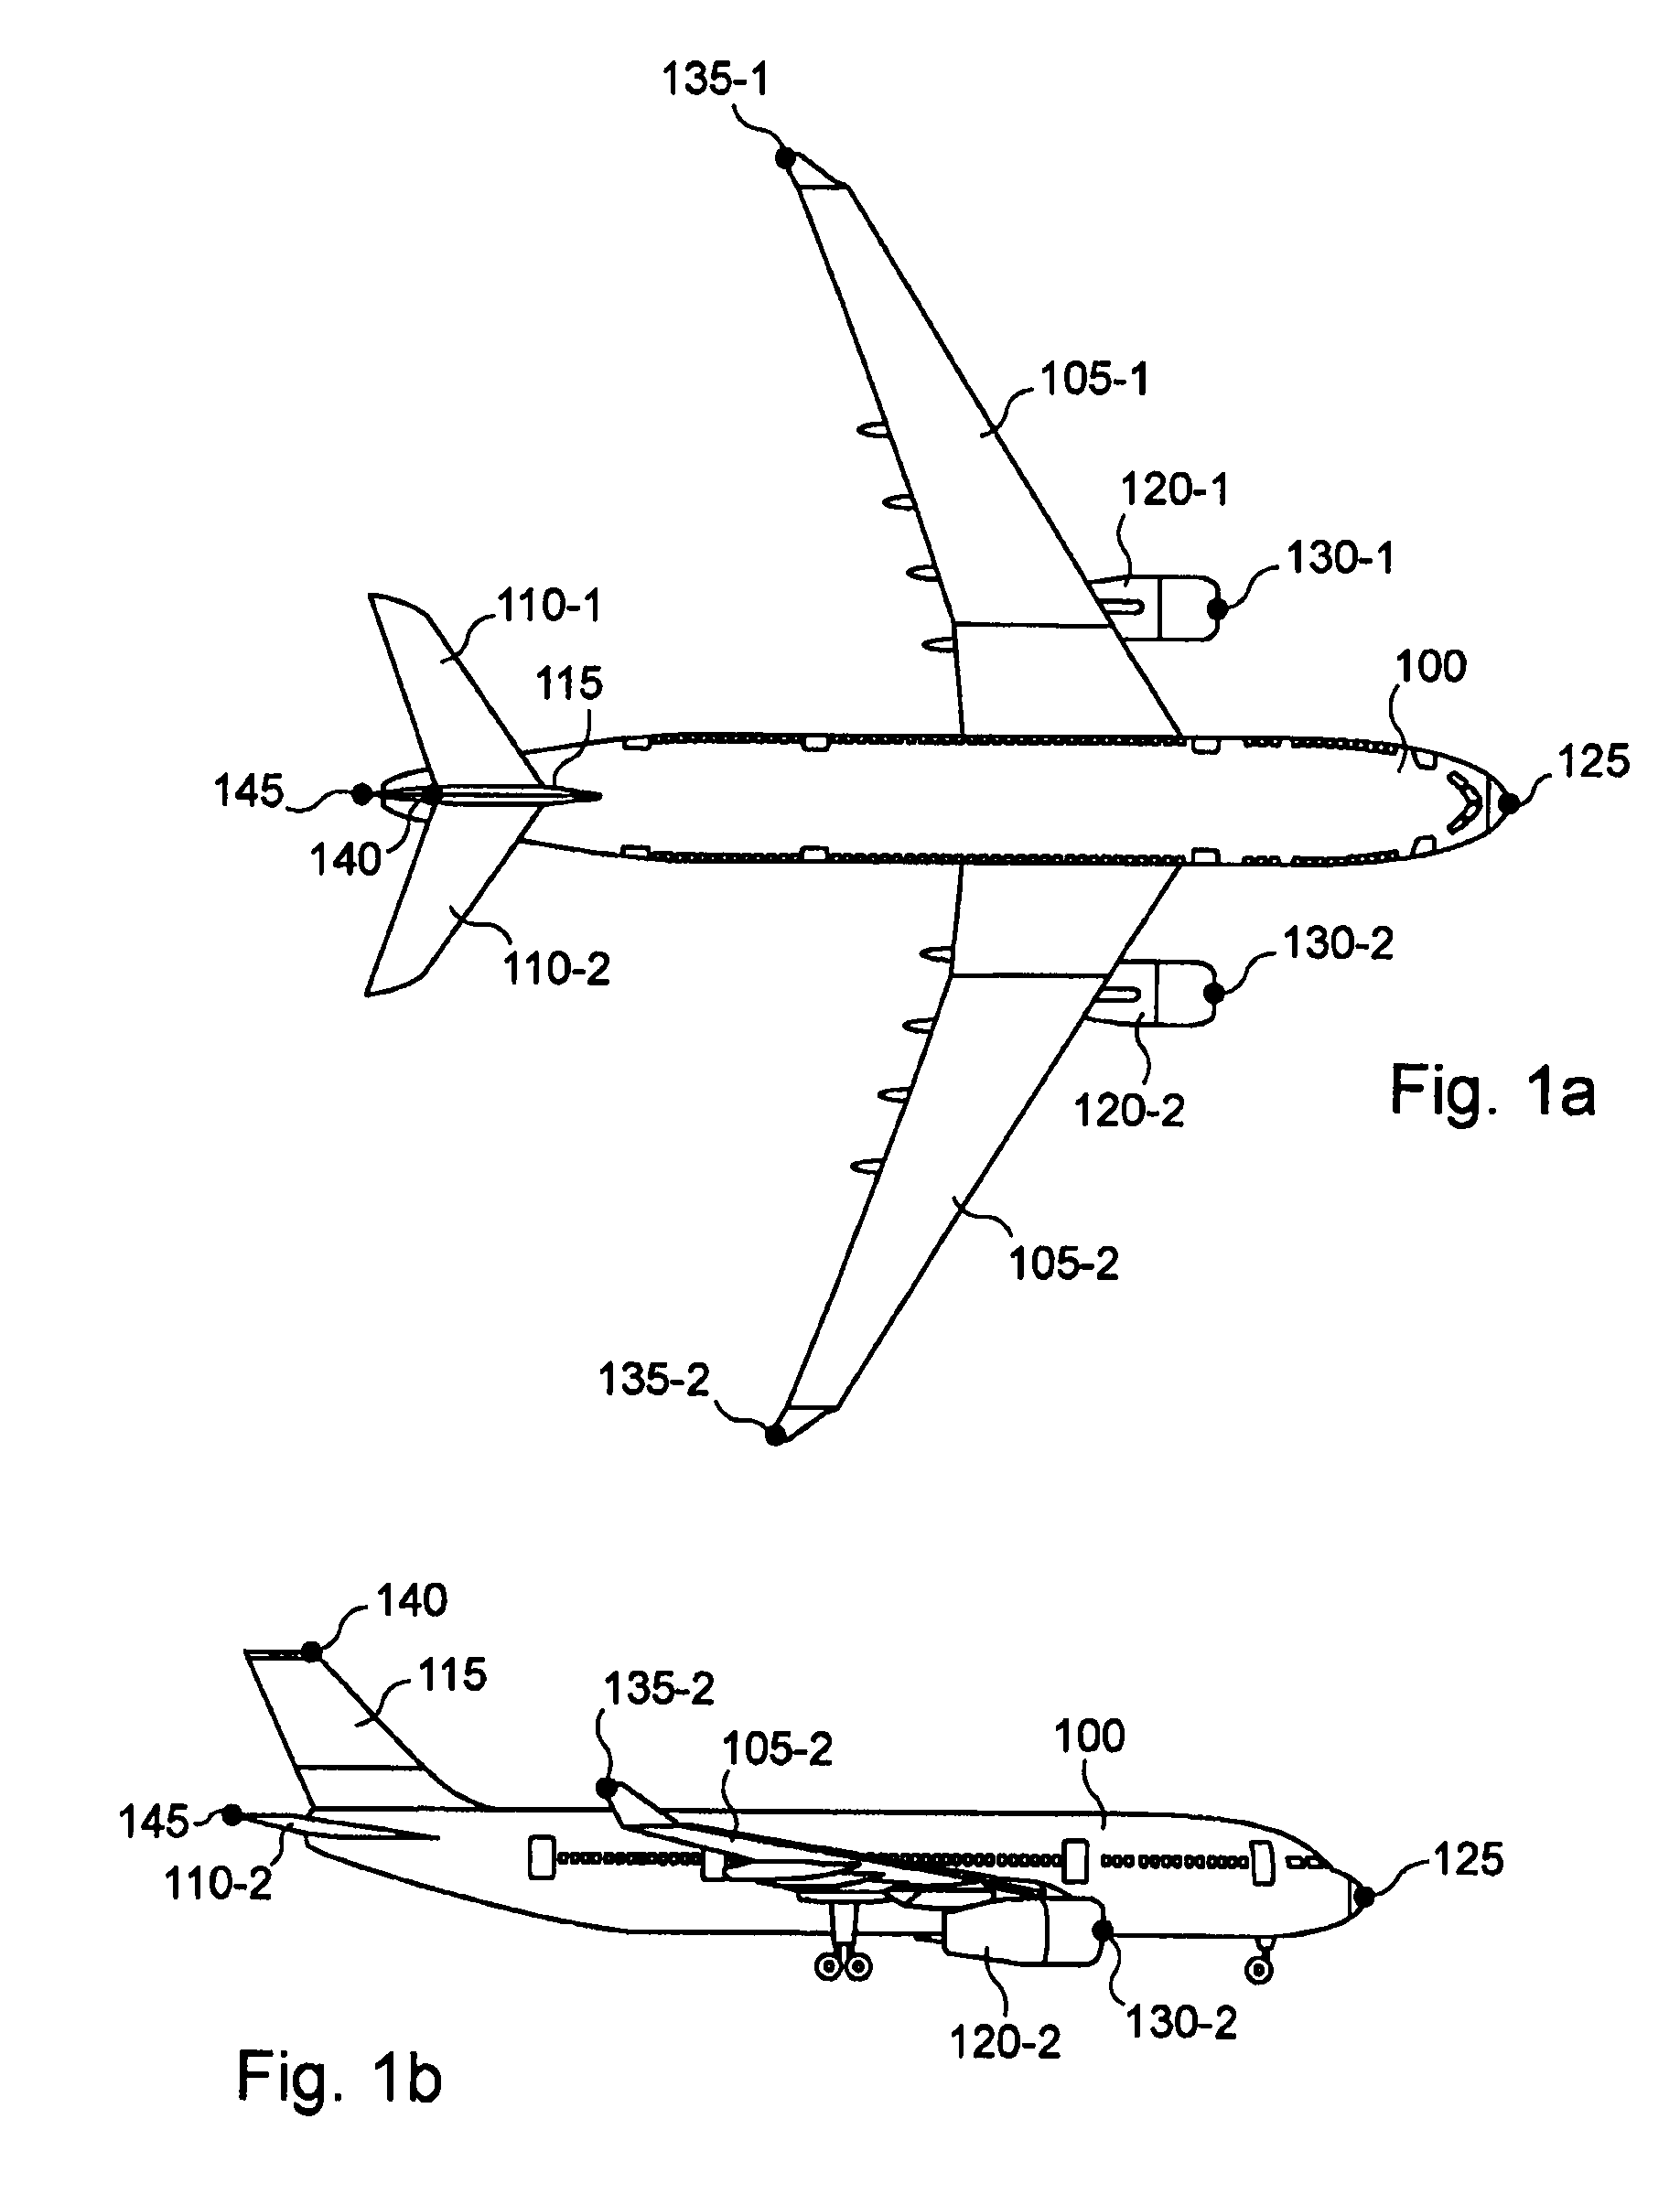 Method and device for preventing collisions on the ground for aircraft